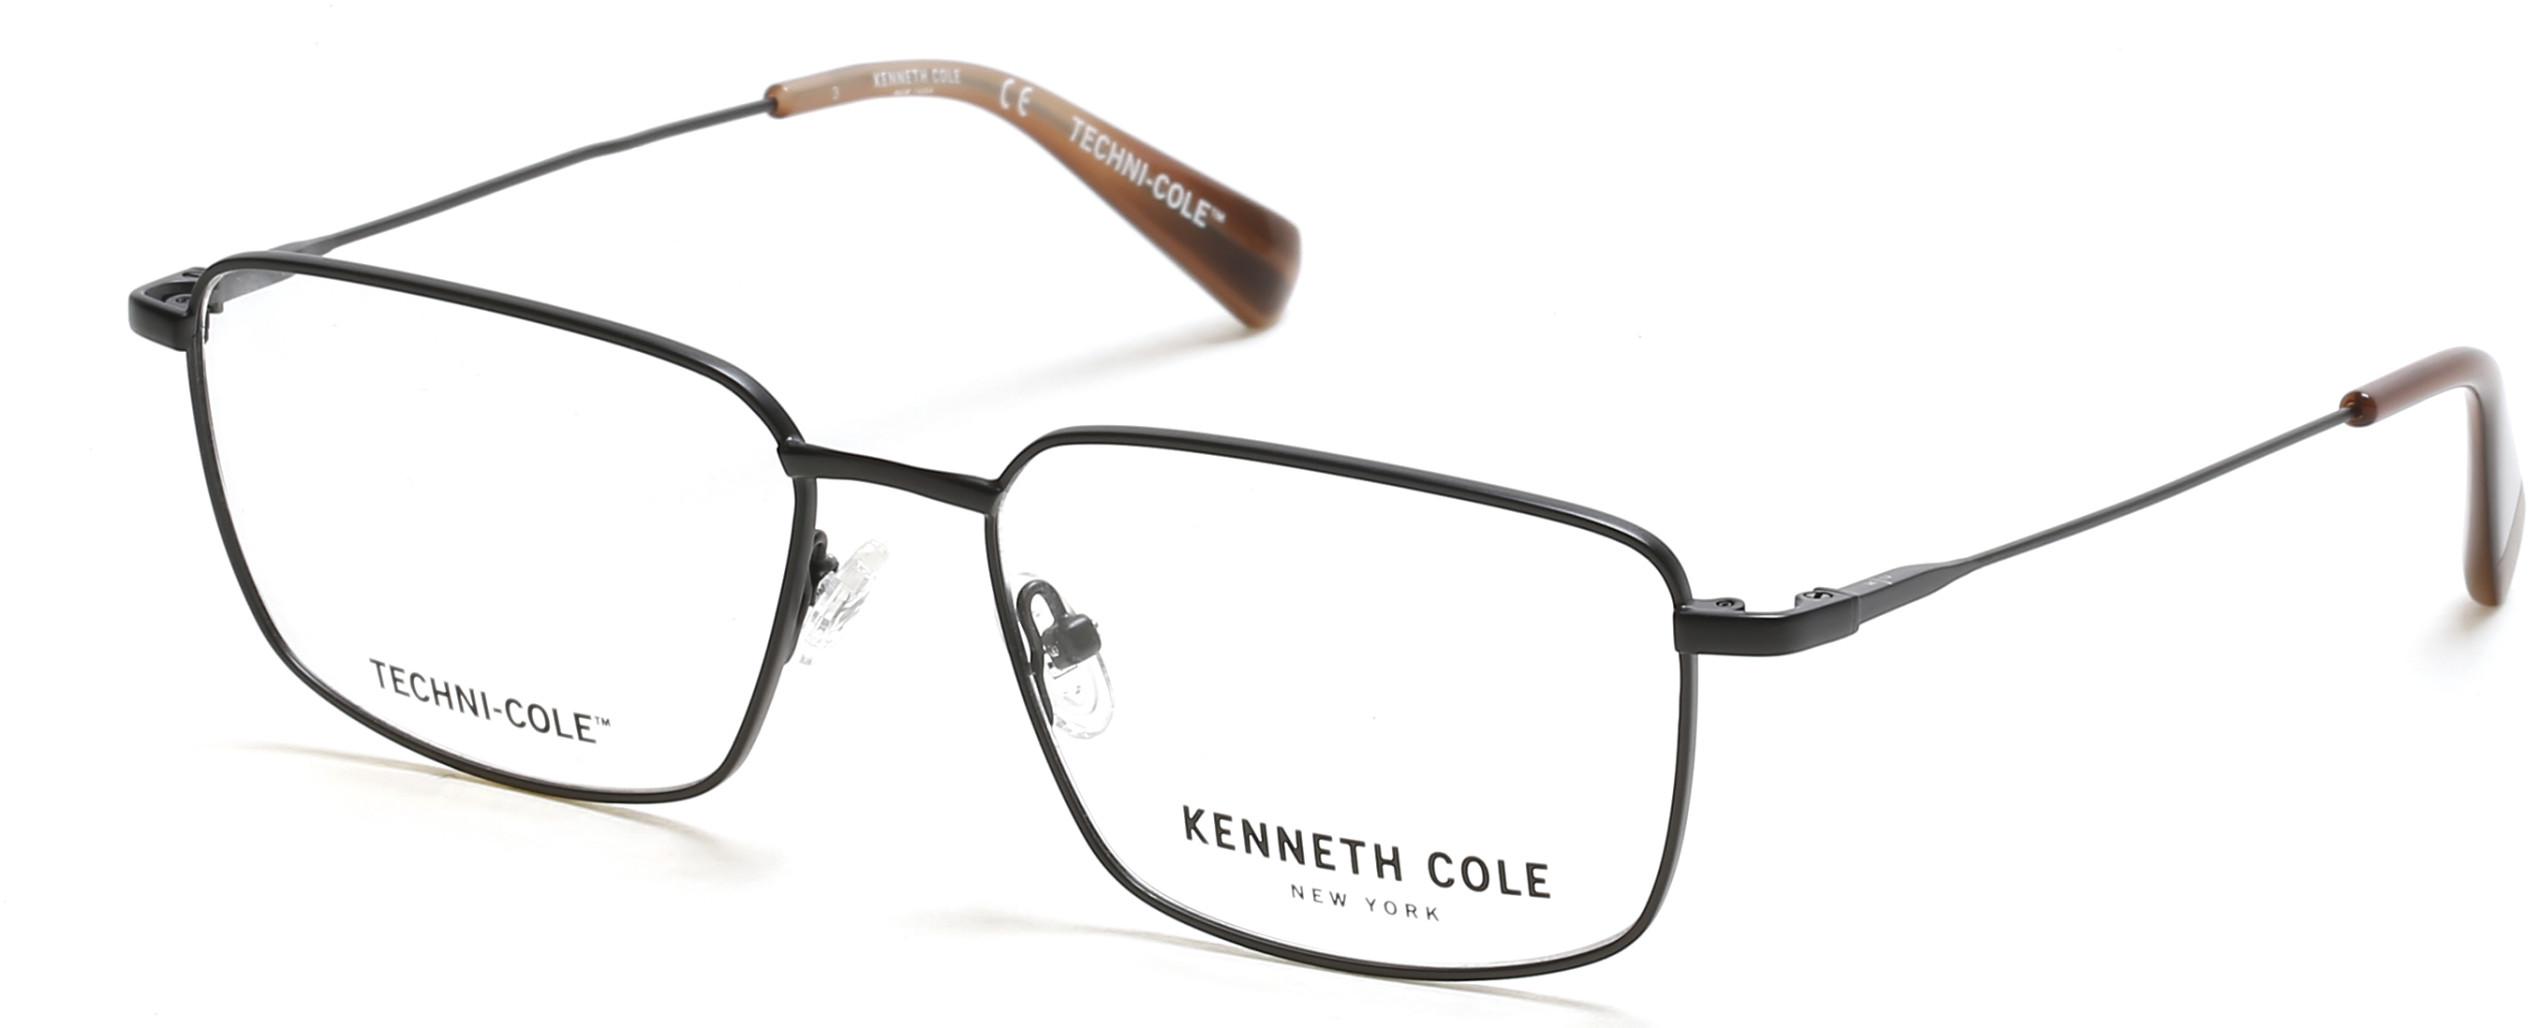 KENNETH COLE NY 0331 002